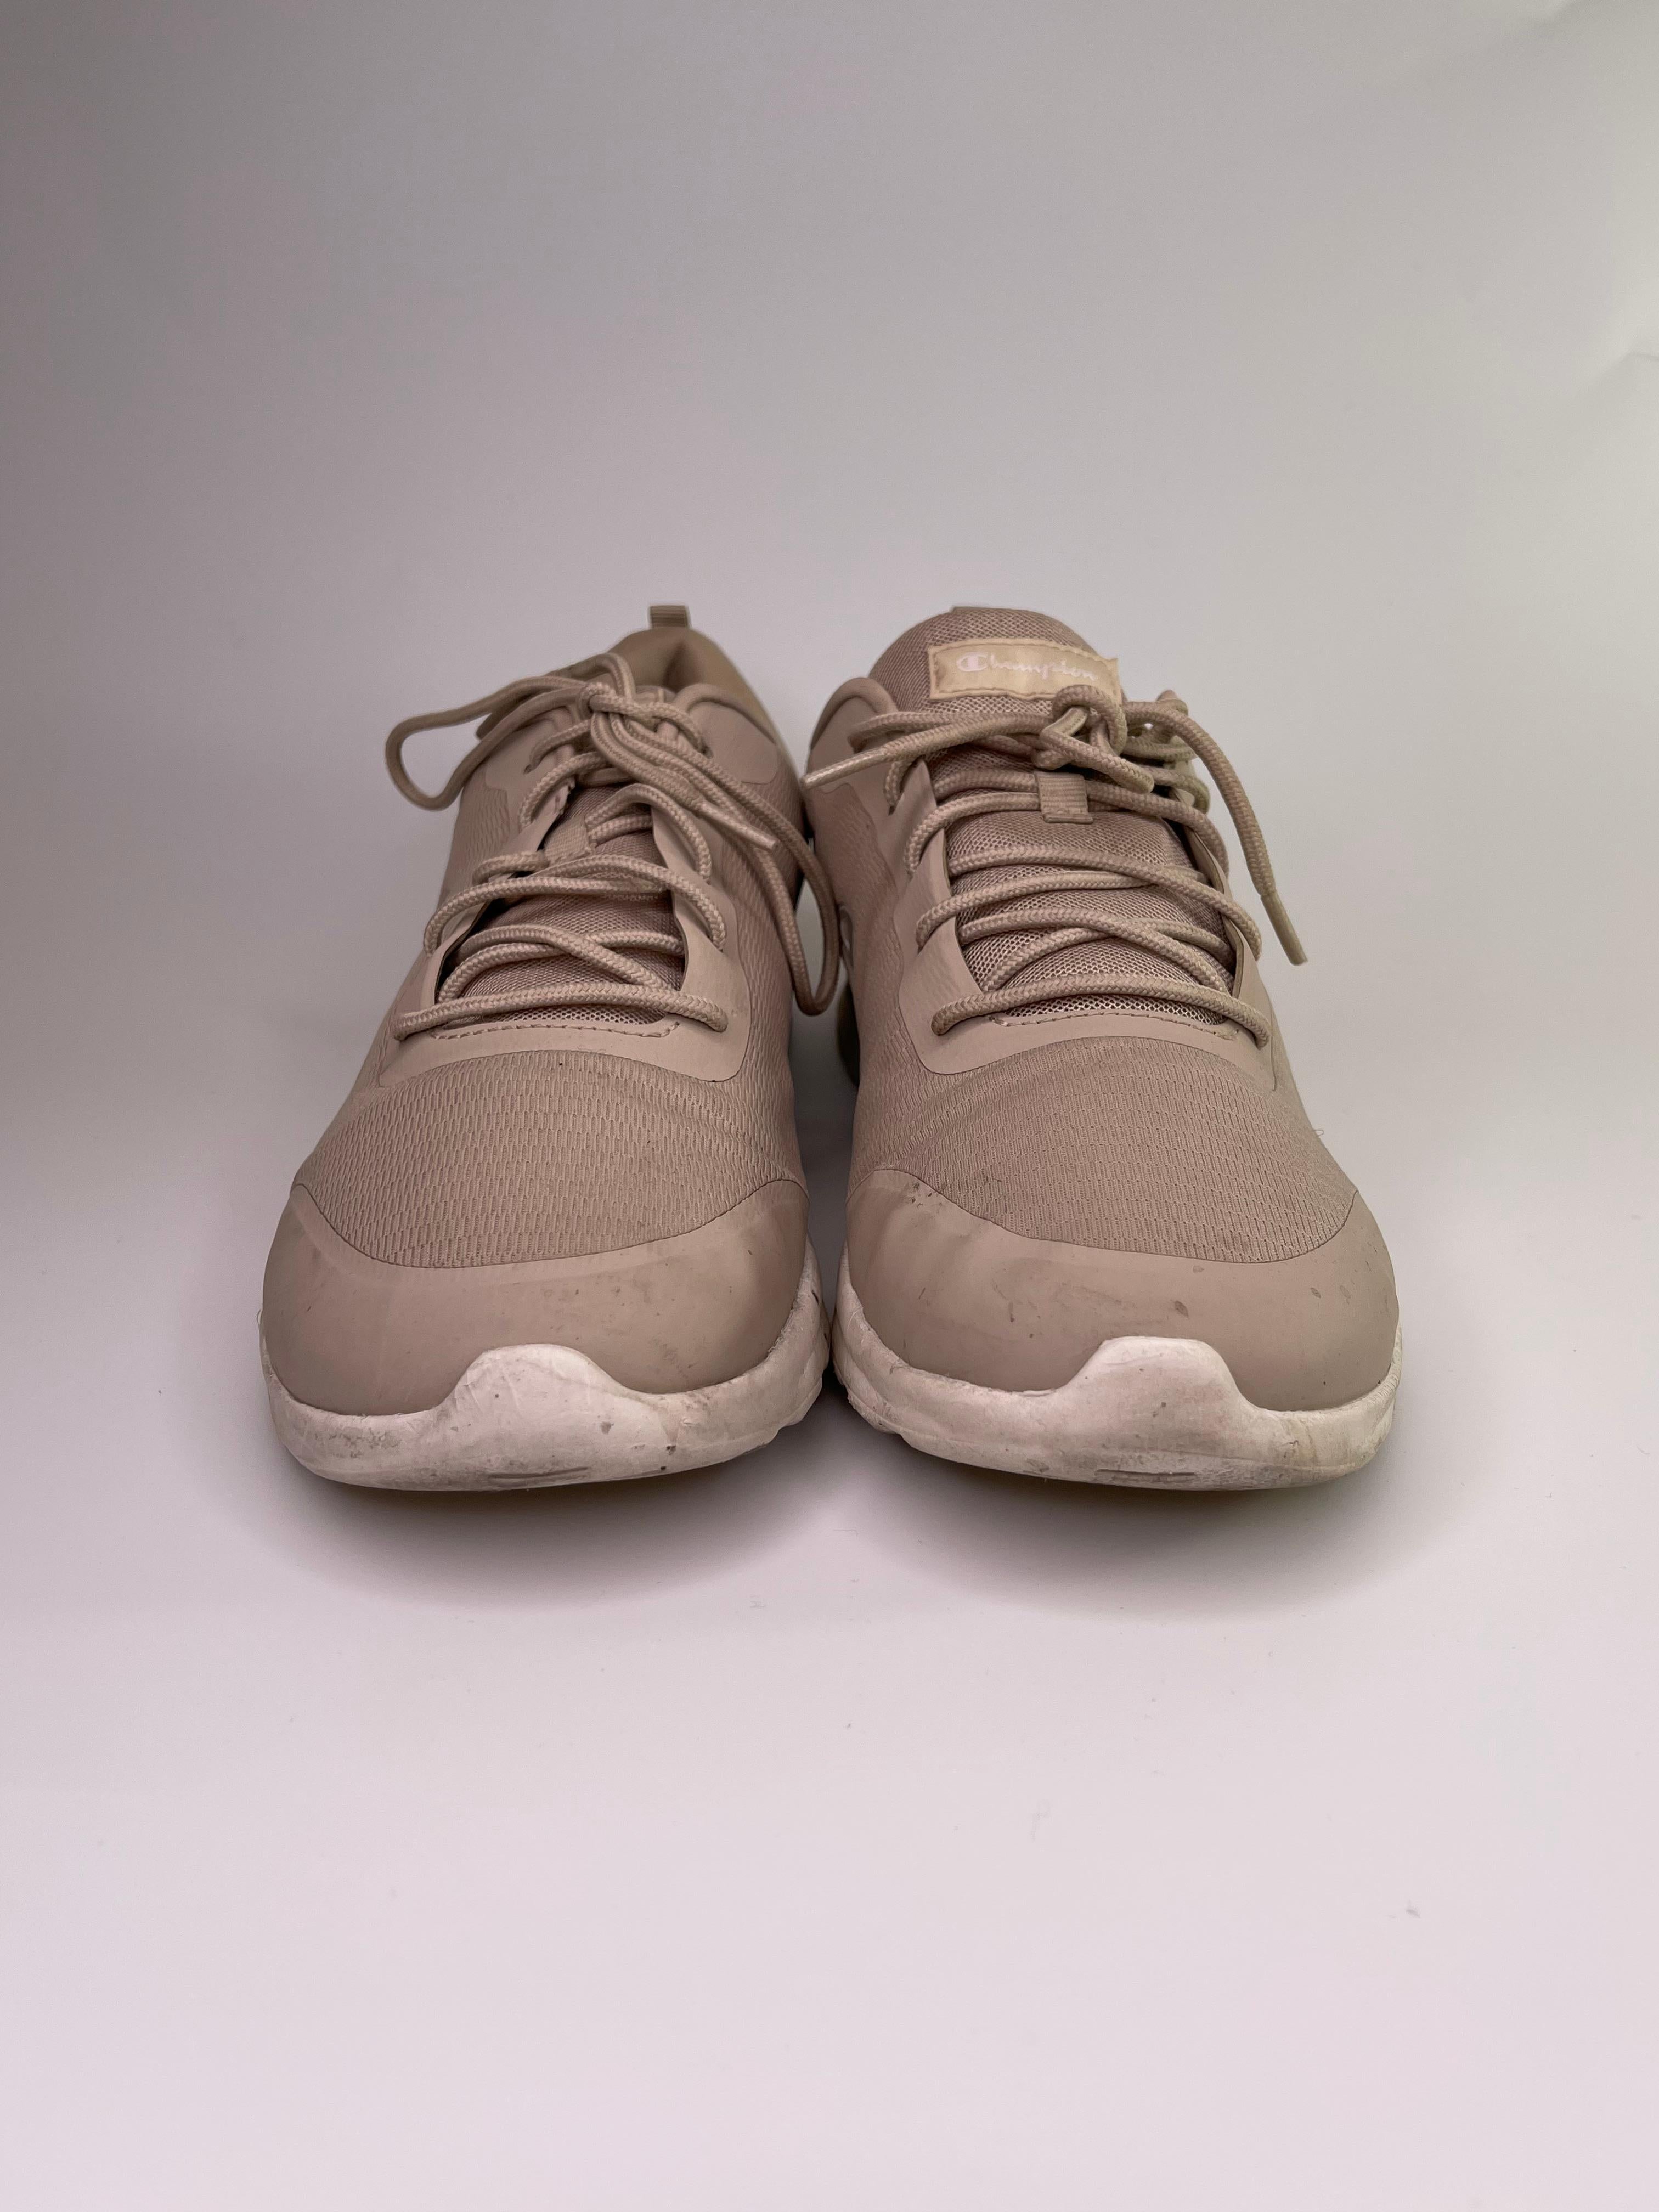 COLOR: Putty
MATERIAL: Synthetic
ITEM CODE: 168749
SIZE: 13 US
CONDITION: Used sneakers with stains on the sides and bottoms.

Made in